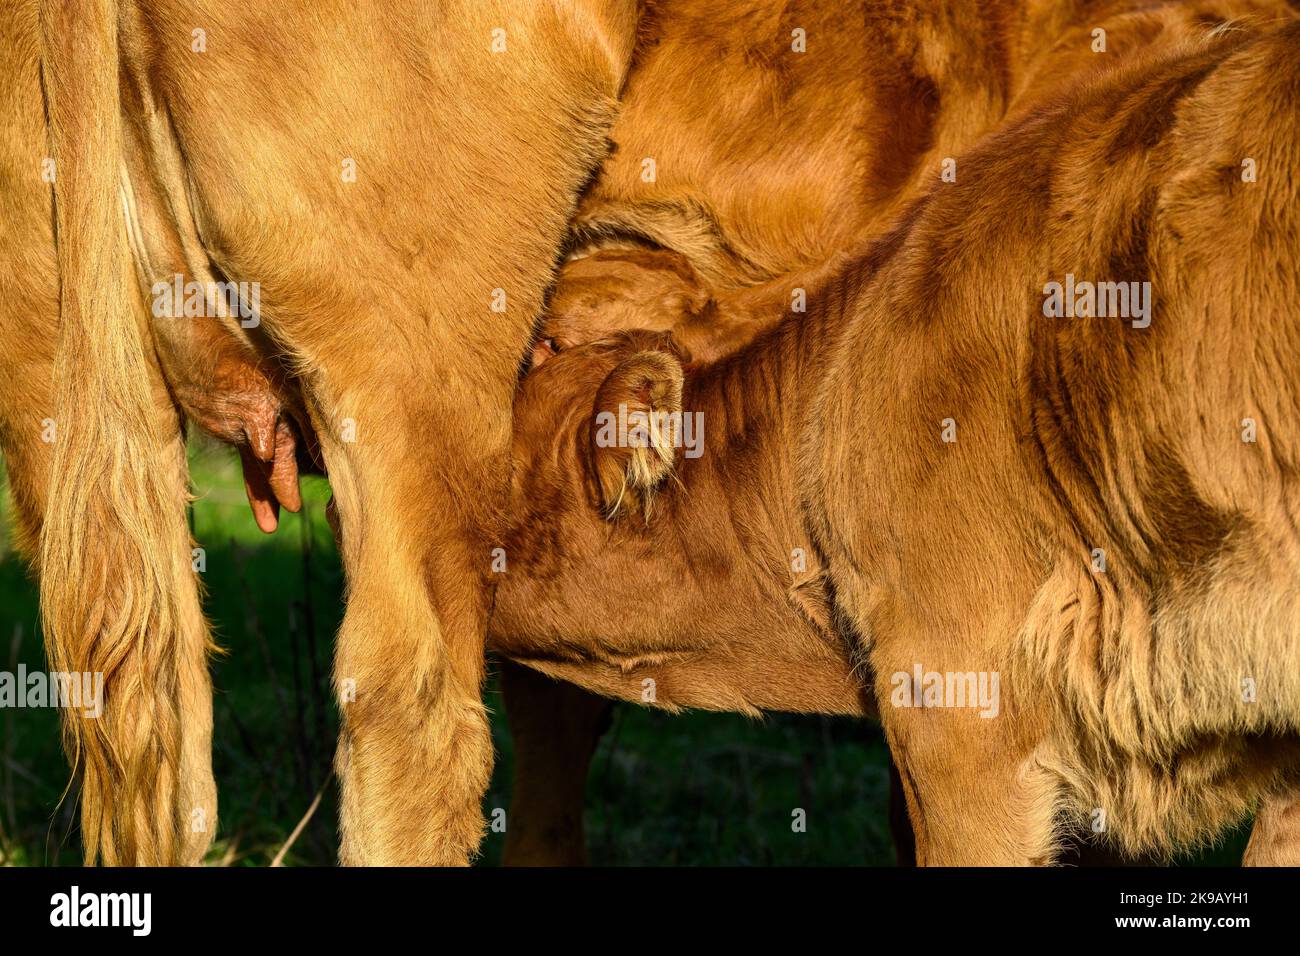 Sunlit brown cow & 2 small newborn calves standing in farm field (hungry thirsty twin youngsters, mother's milk, close-up) - Yorkshire, England, UK. Stock Photo